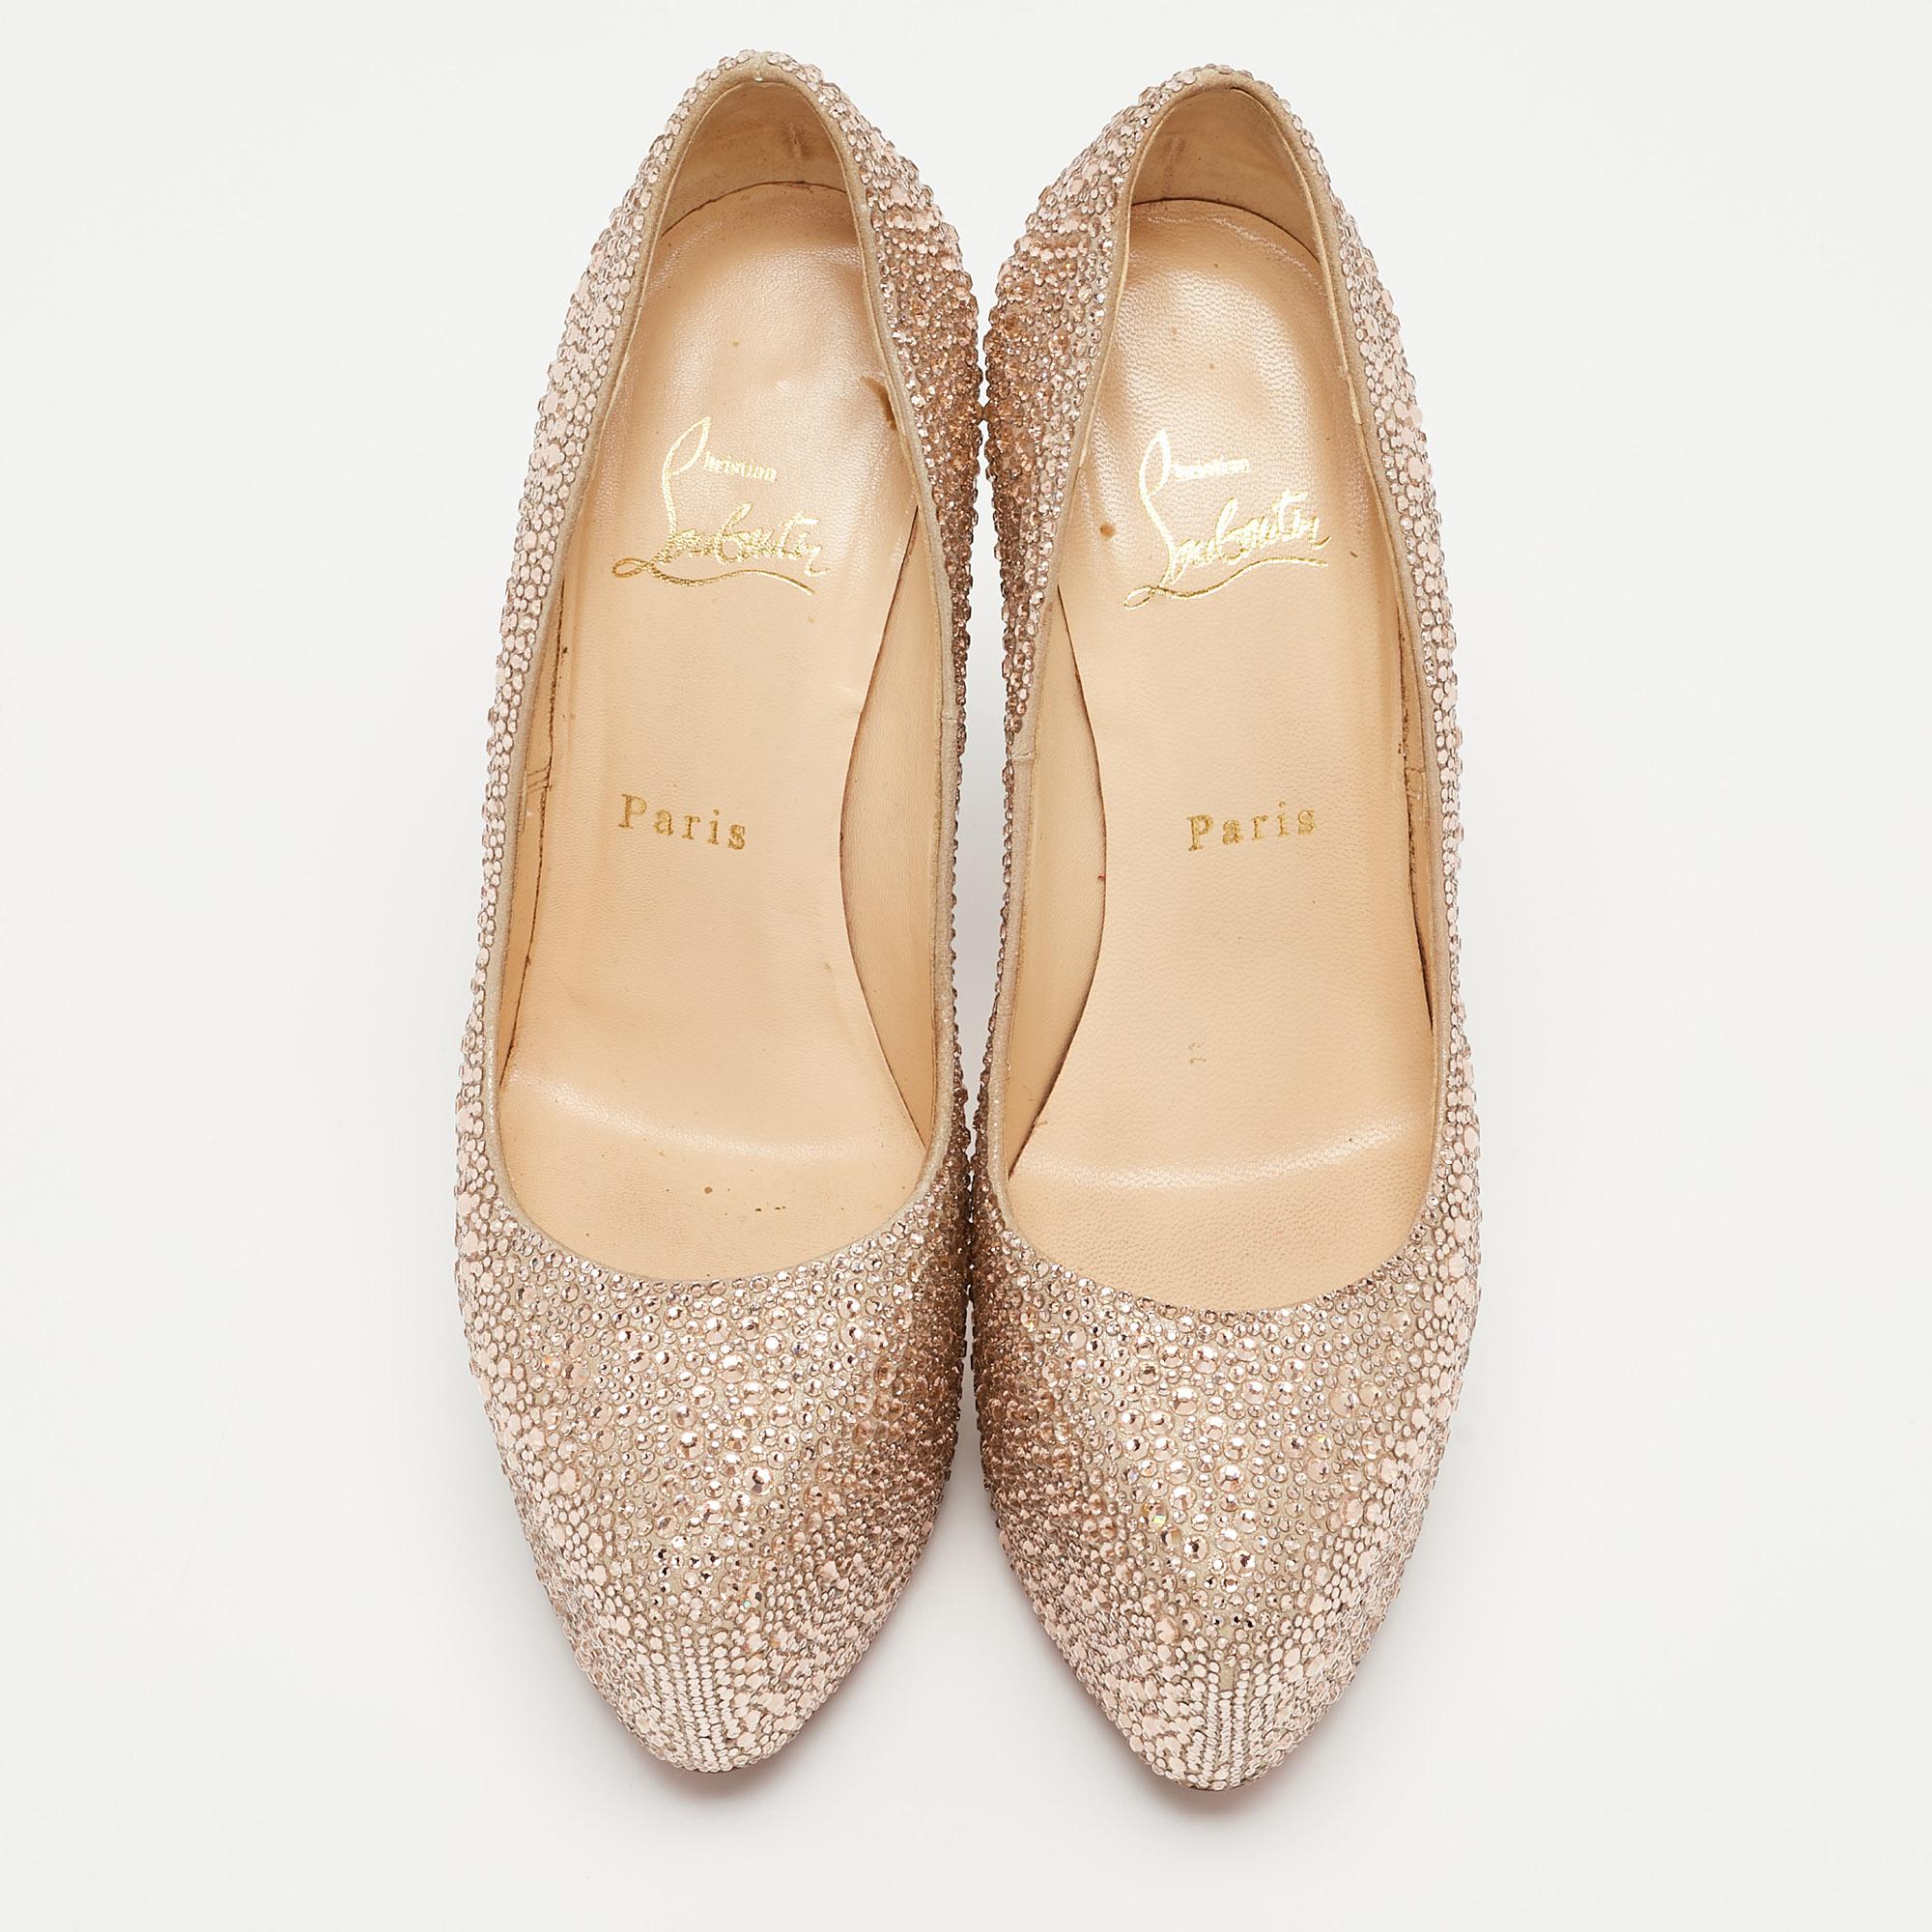 Christian Louboutin Metallic Pink Crystal Embellished Suede Daffodile Pumps Size In Good Condition For Sale In Dubai, Al Qouz 2